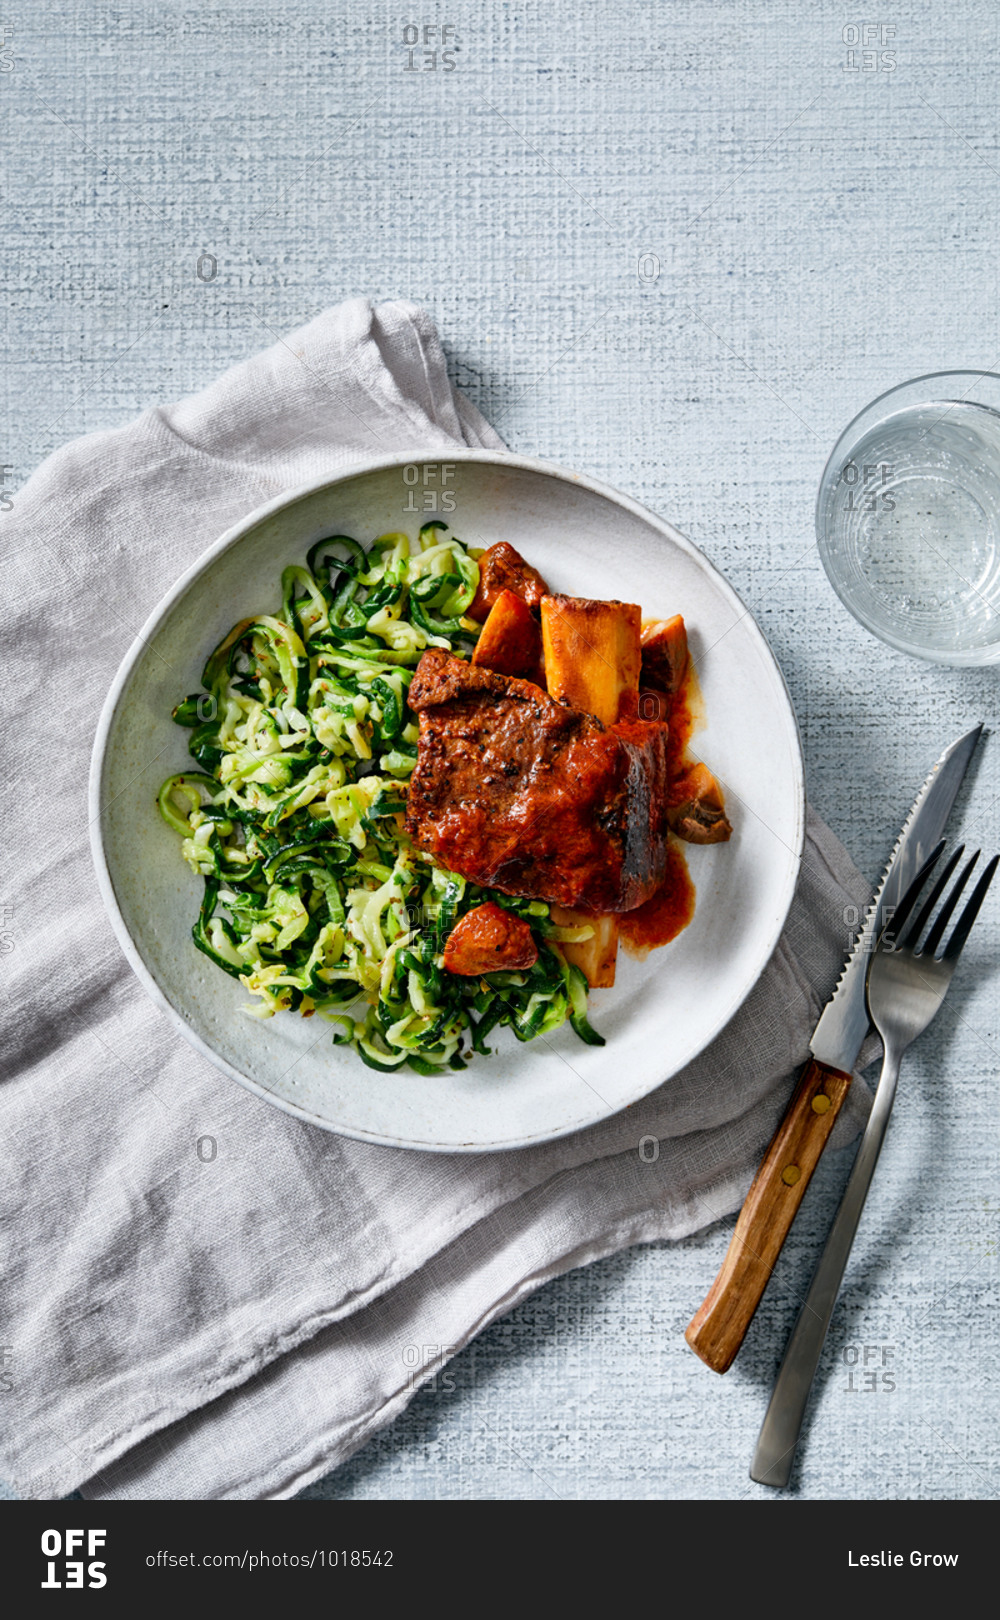 Beef ribs and zucchini noodles